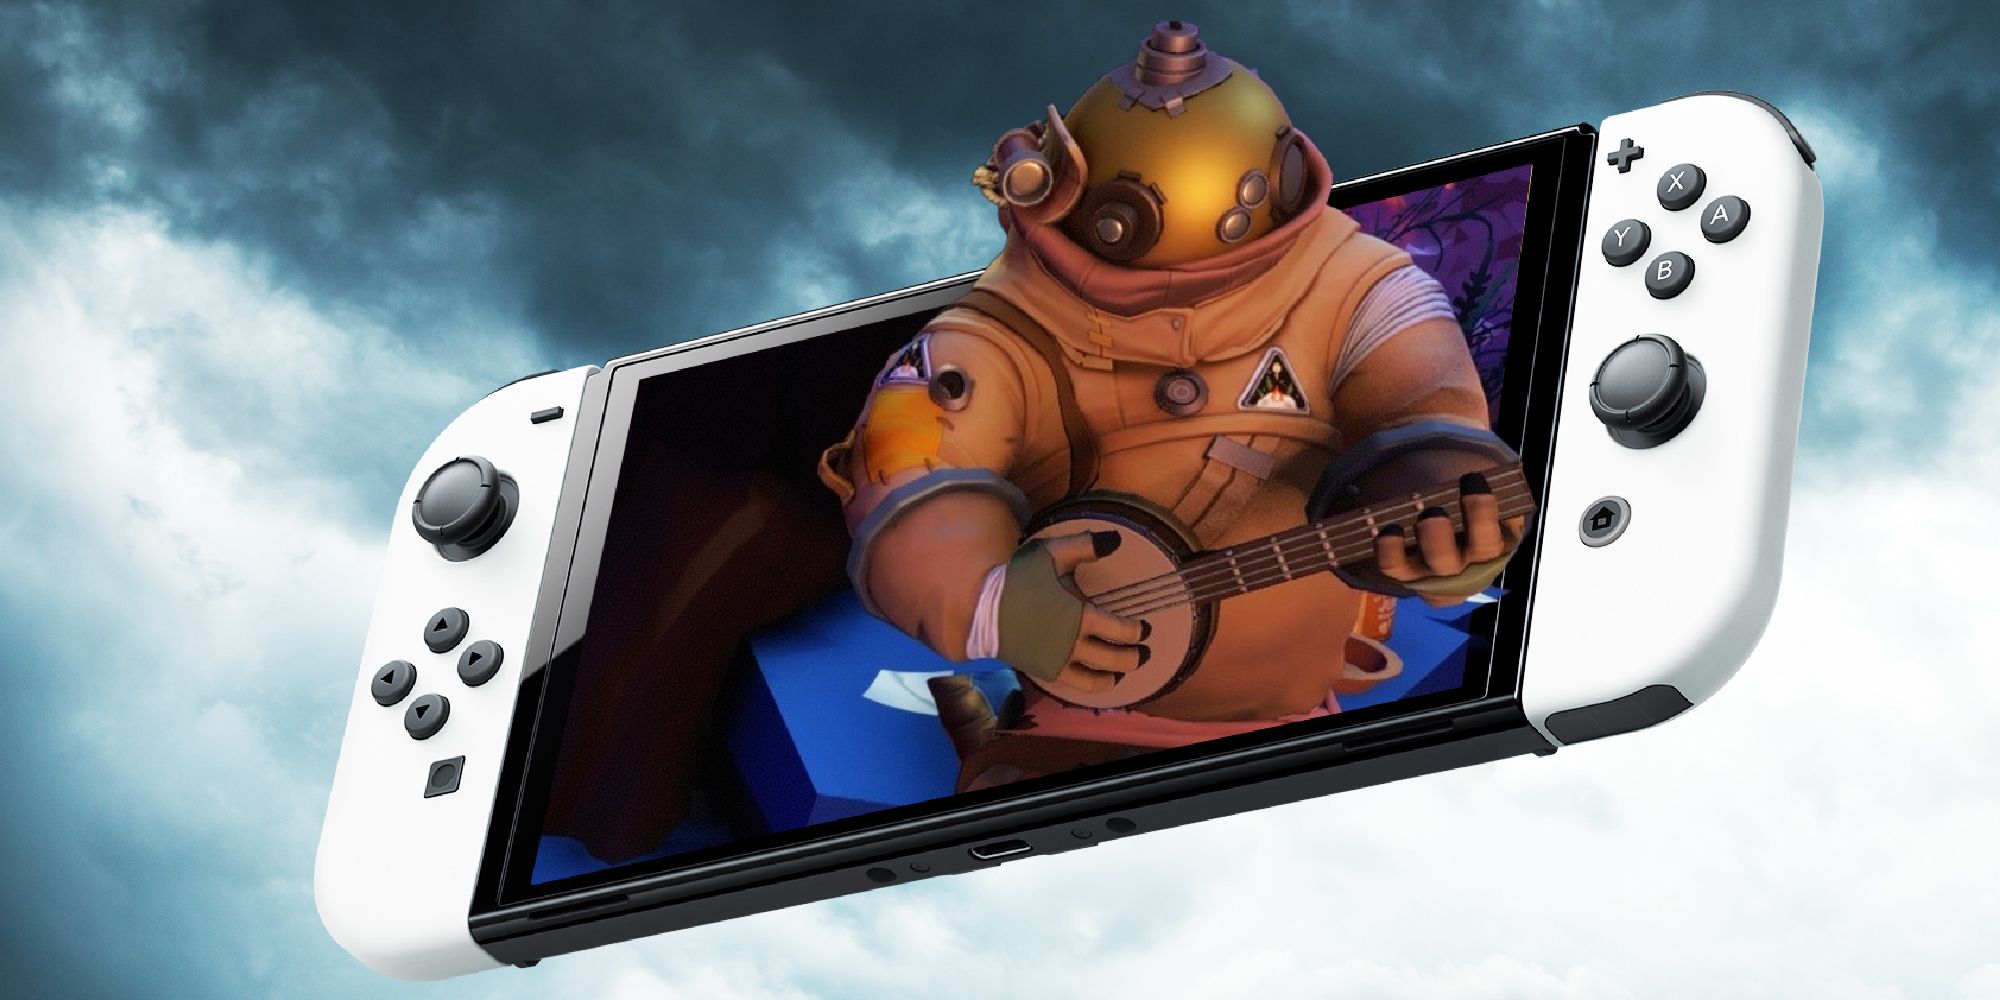 A Nintendo Switch console set against a blue-gray sky, with an Outer Wilds character playing banjo emerging from the Switch